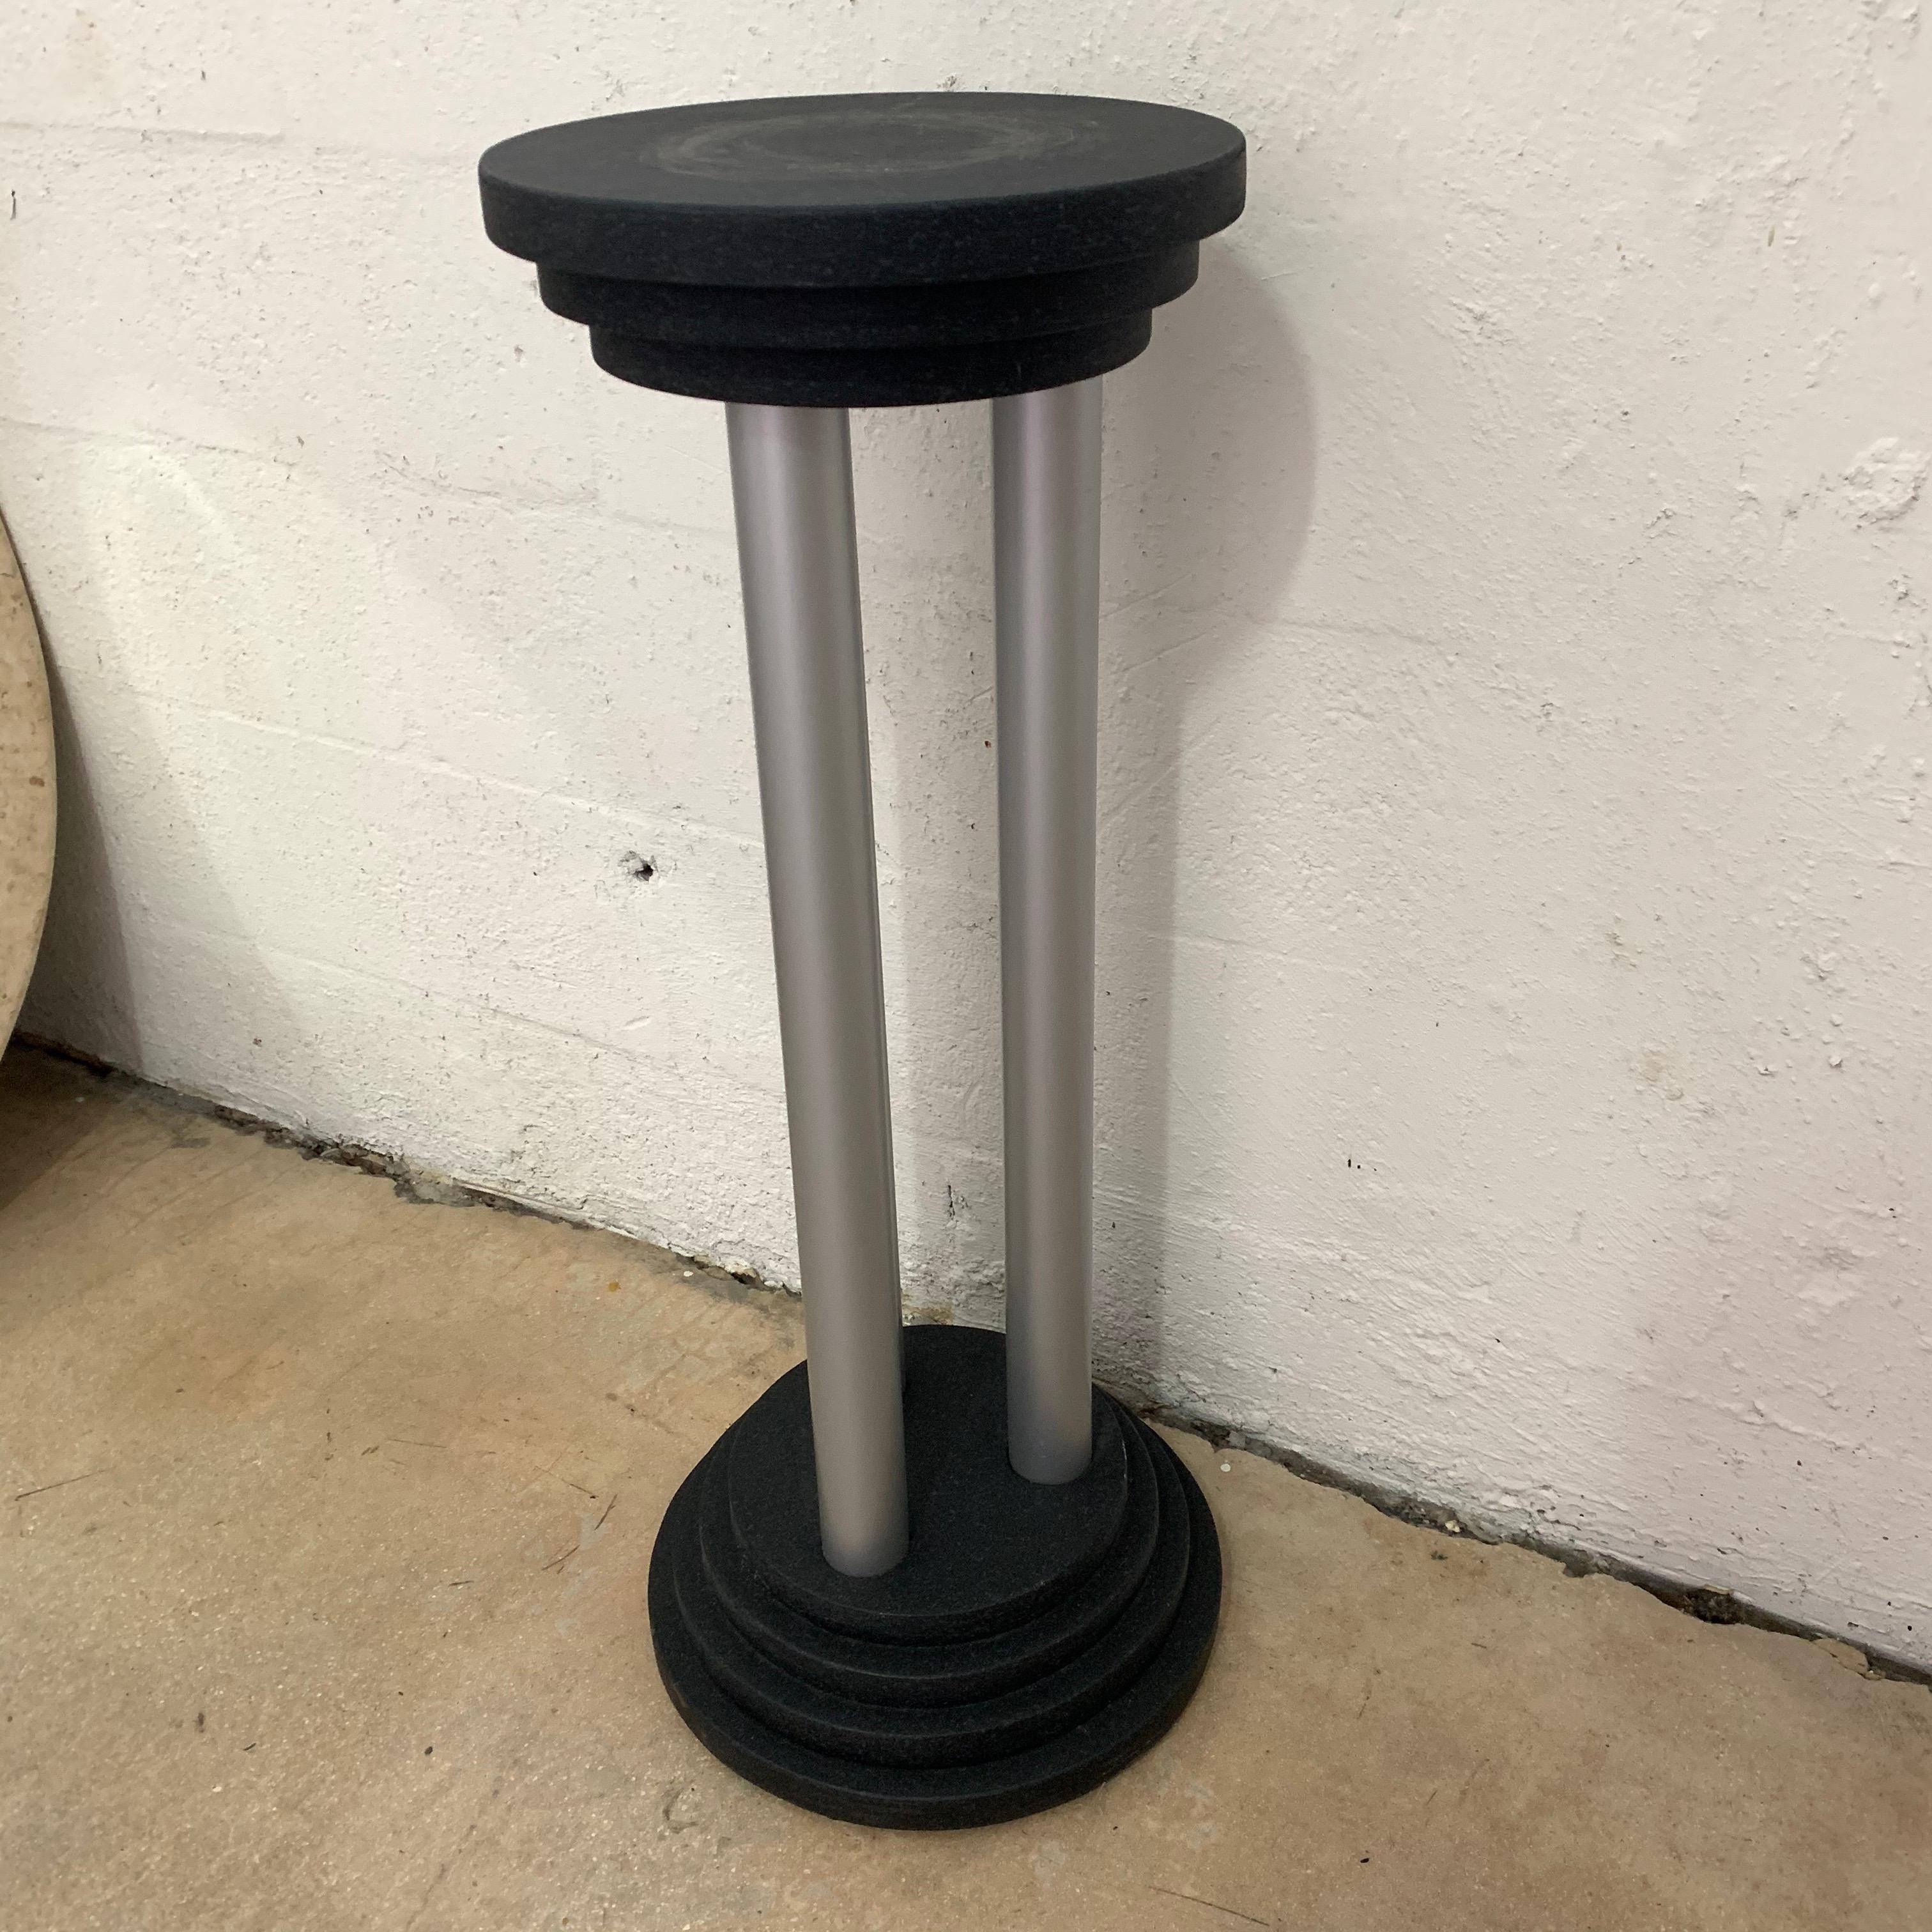 Postmodern pedestal or plant stand rendered in stacked wood base and top, painted in a black and grey matte fleck tone paint, suspended between three grey painted wood cylinder columns, Italy, 1990s.